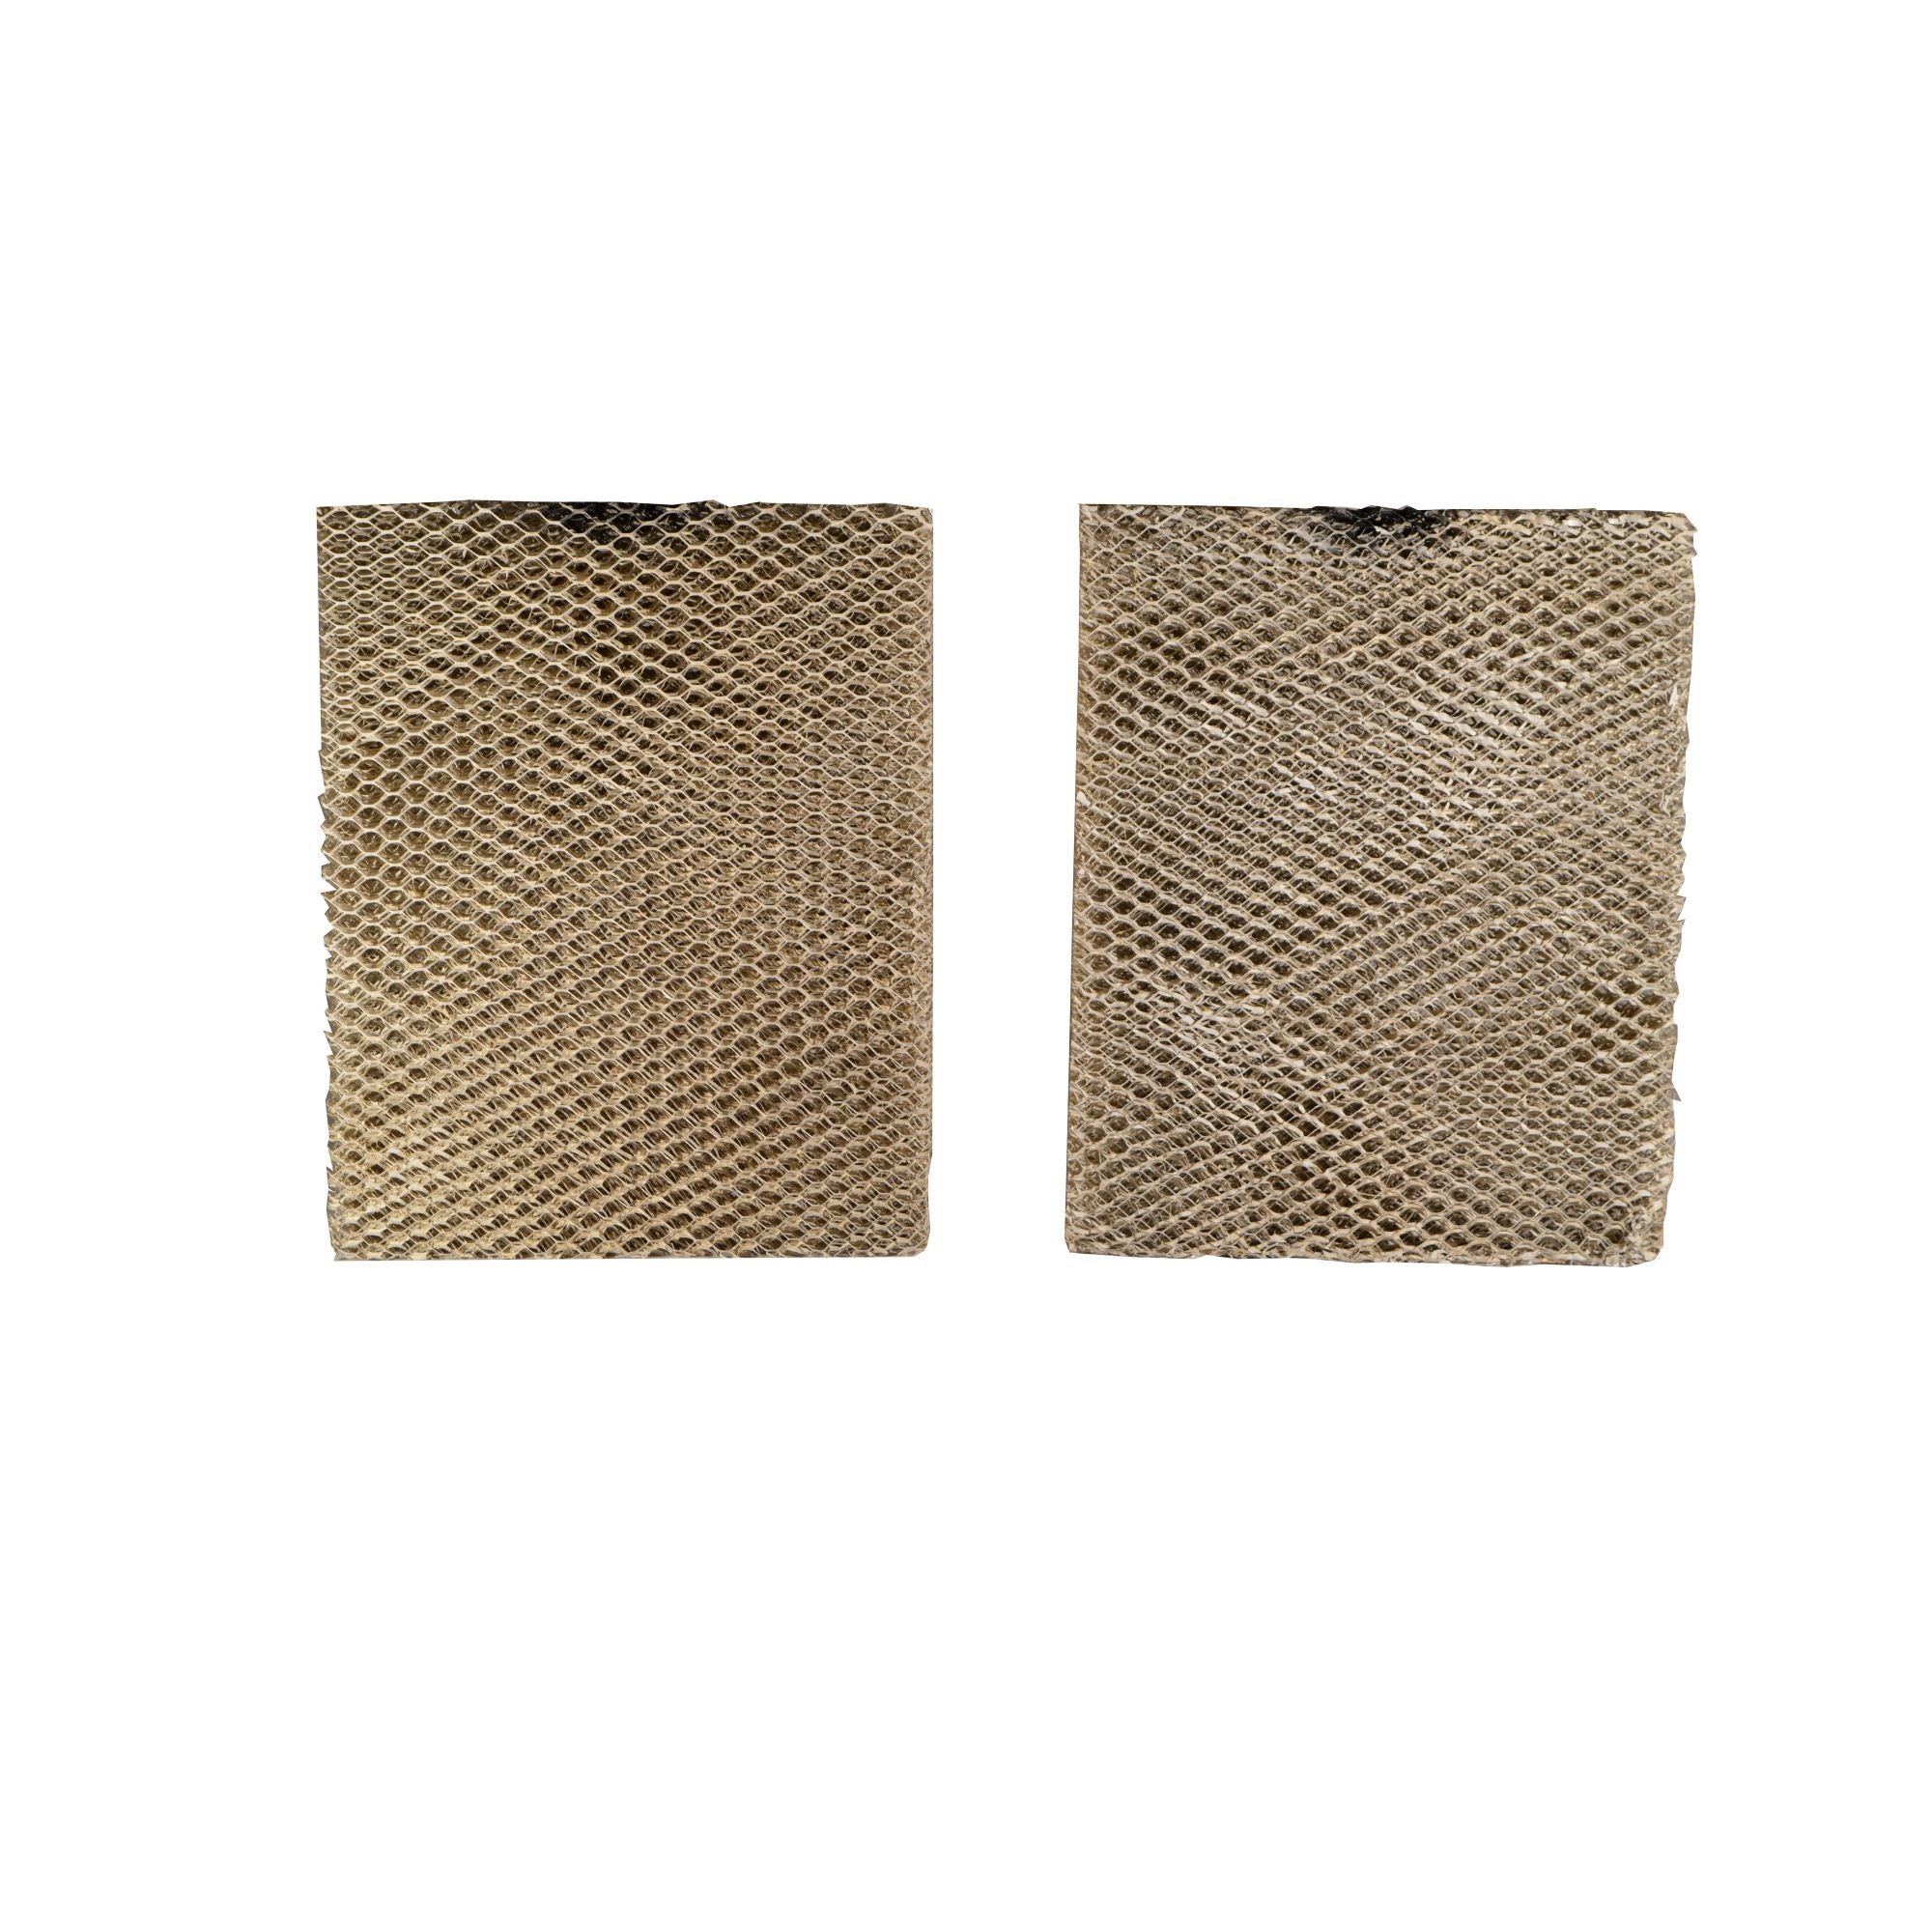 Wait RF 2000 Replacement Evaporator Pad for Model 7000 Flow Through Humidifier. Pkg. of 2